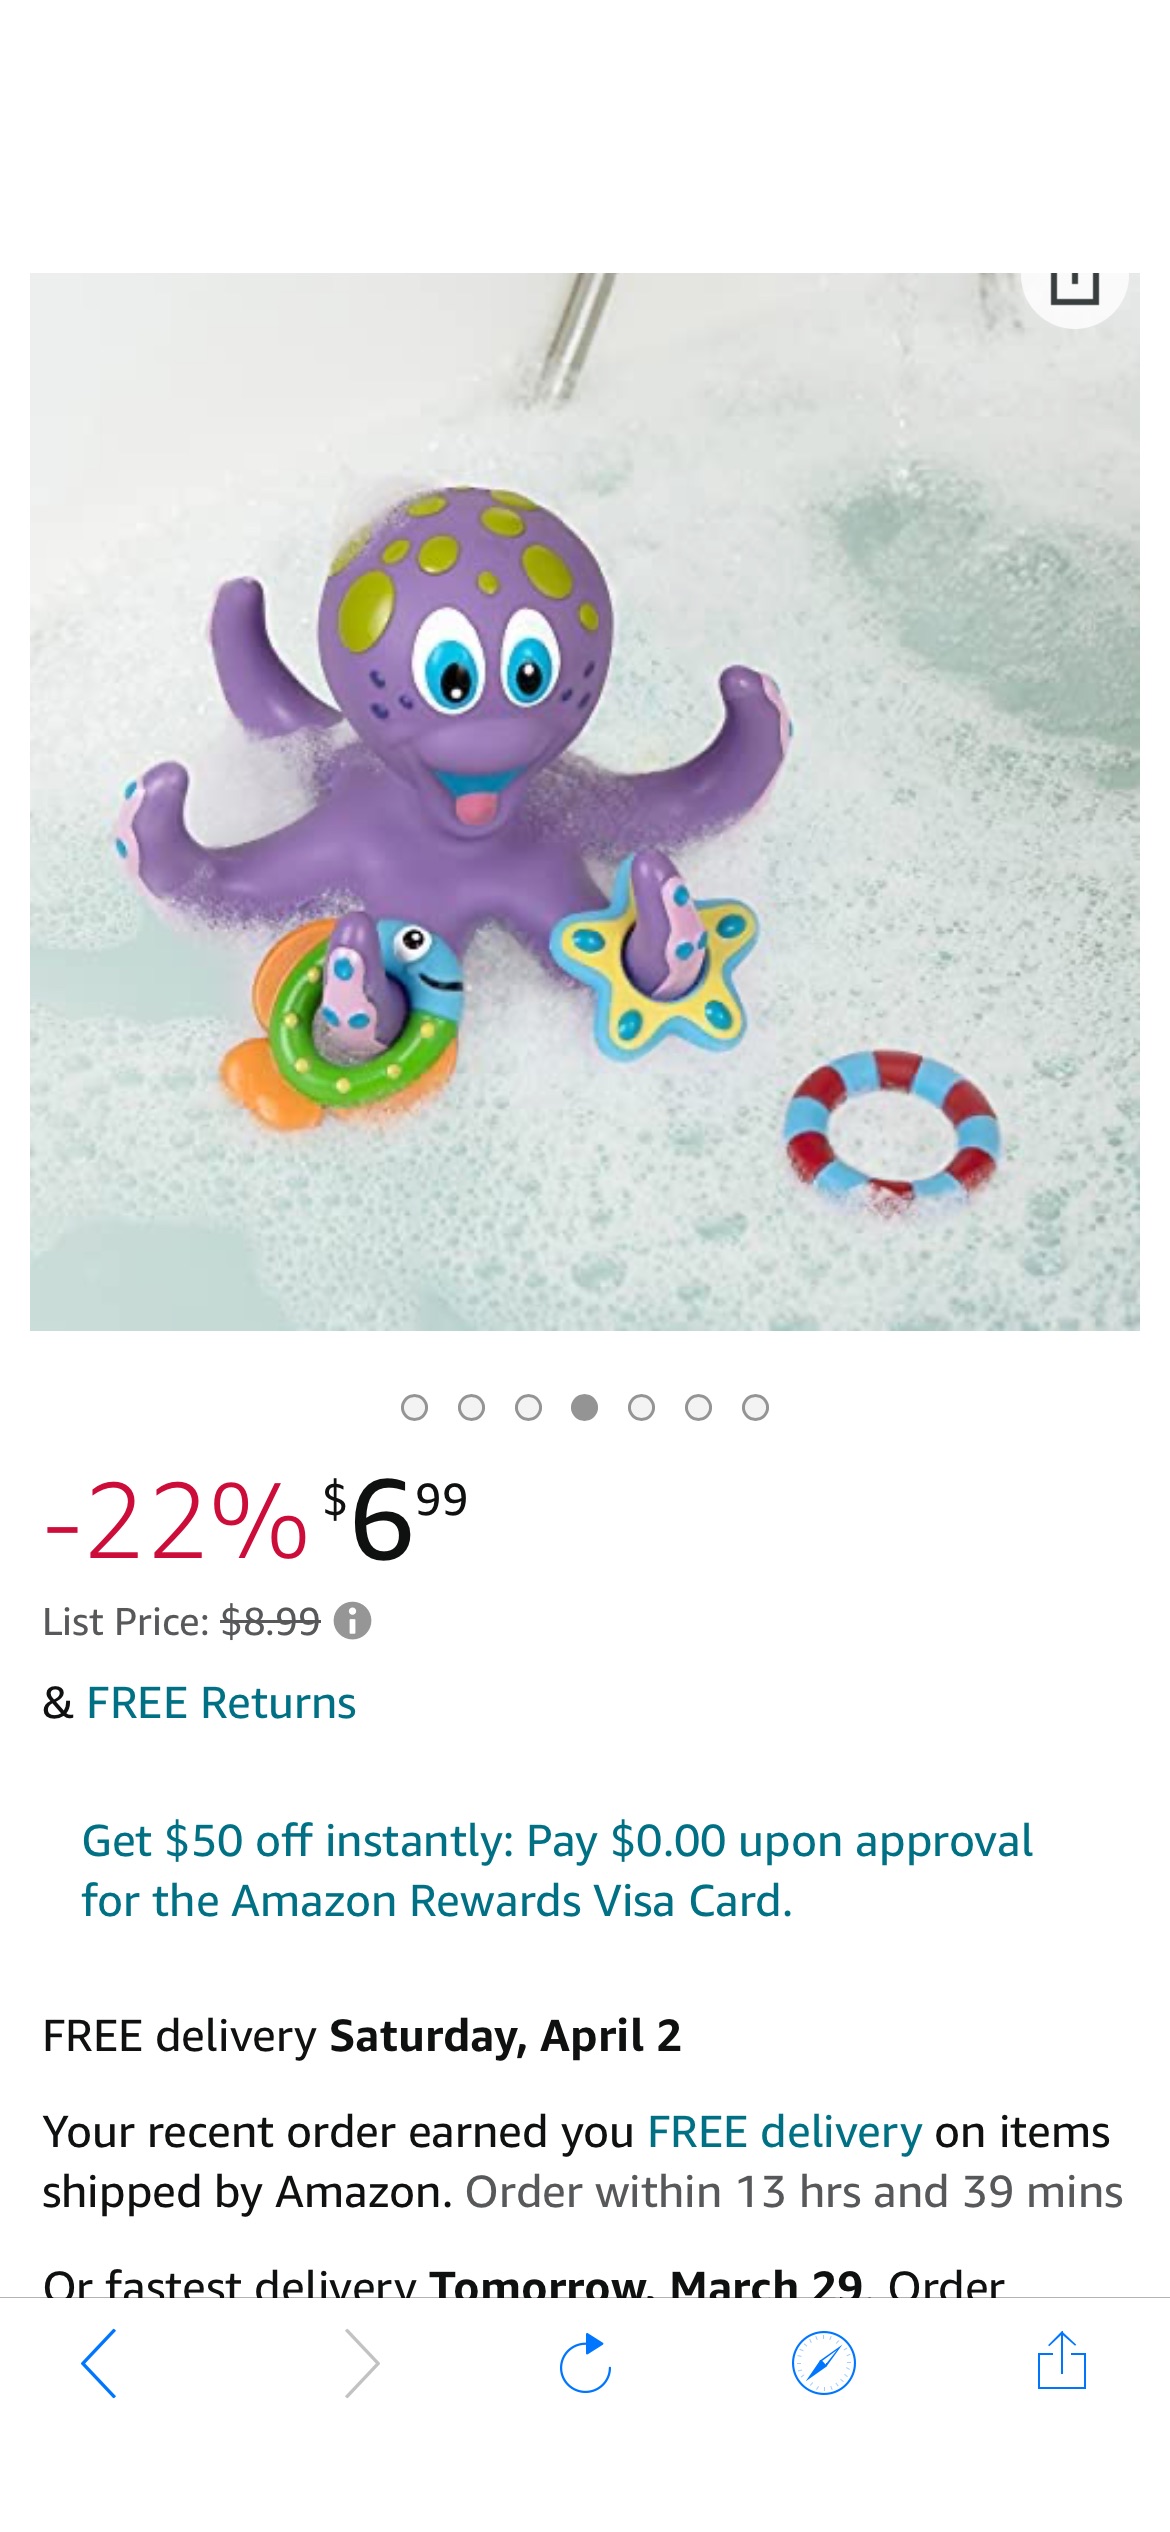 Amazon.com : Nuby Floating Purple Octopus with 3 Hoopla Rings Interactive Bath Toy : Toys & Games婴儿洗澡玩具